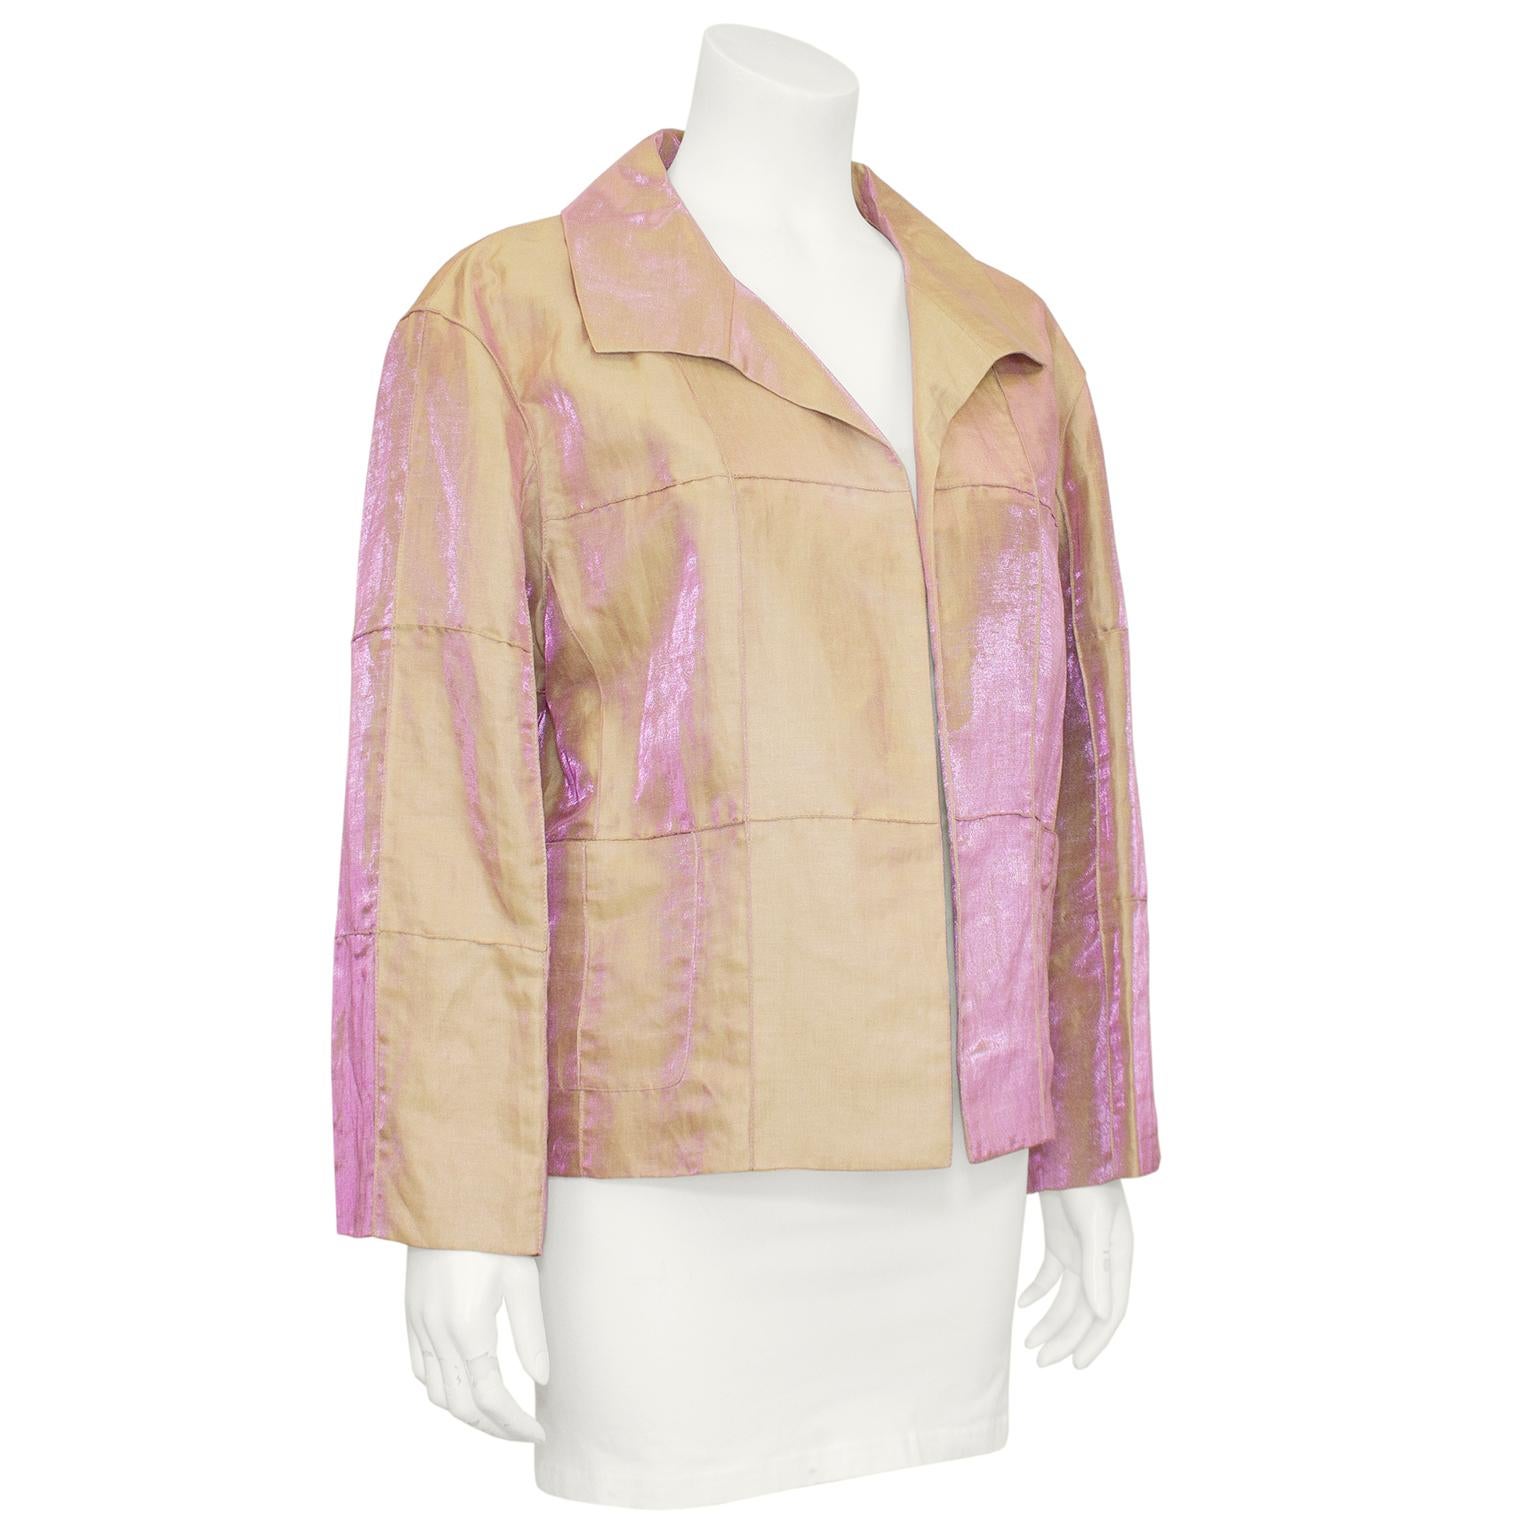 Chanel lightweight beige and pink iridescent silk jacket from the early 2000s. Open front with patch pockets at hips and raised top stitching that creates the look of rectangular patches sewn together. Beige silk lining with interlocking cc logo